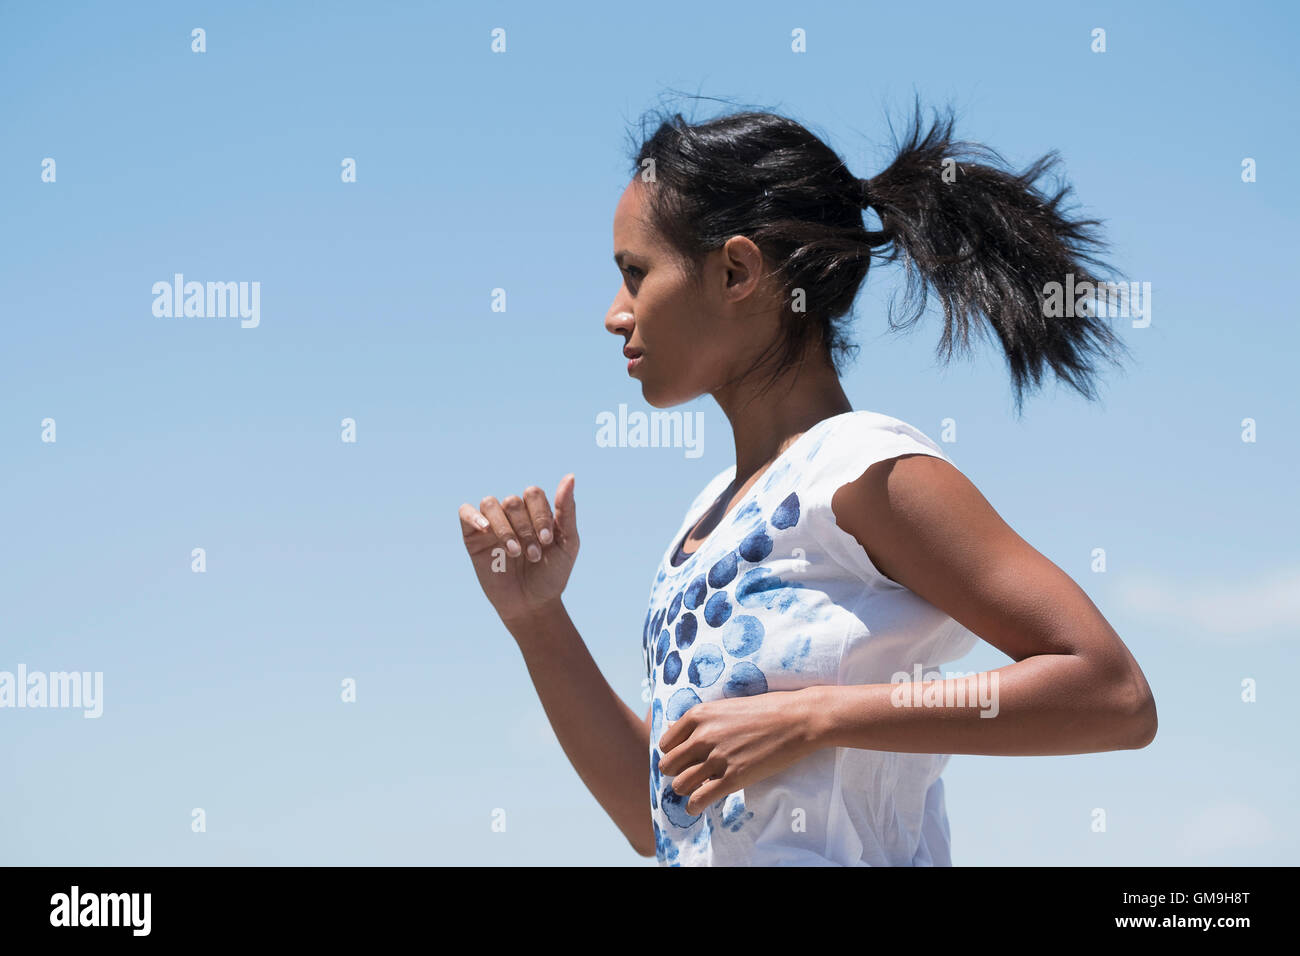 Profile of woman jogging against sky Stock Photo